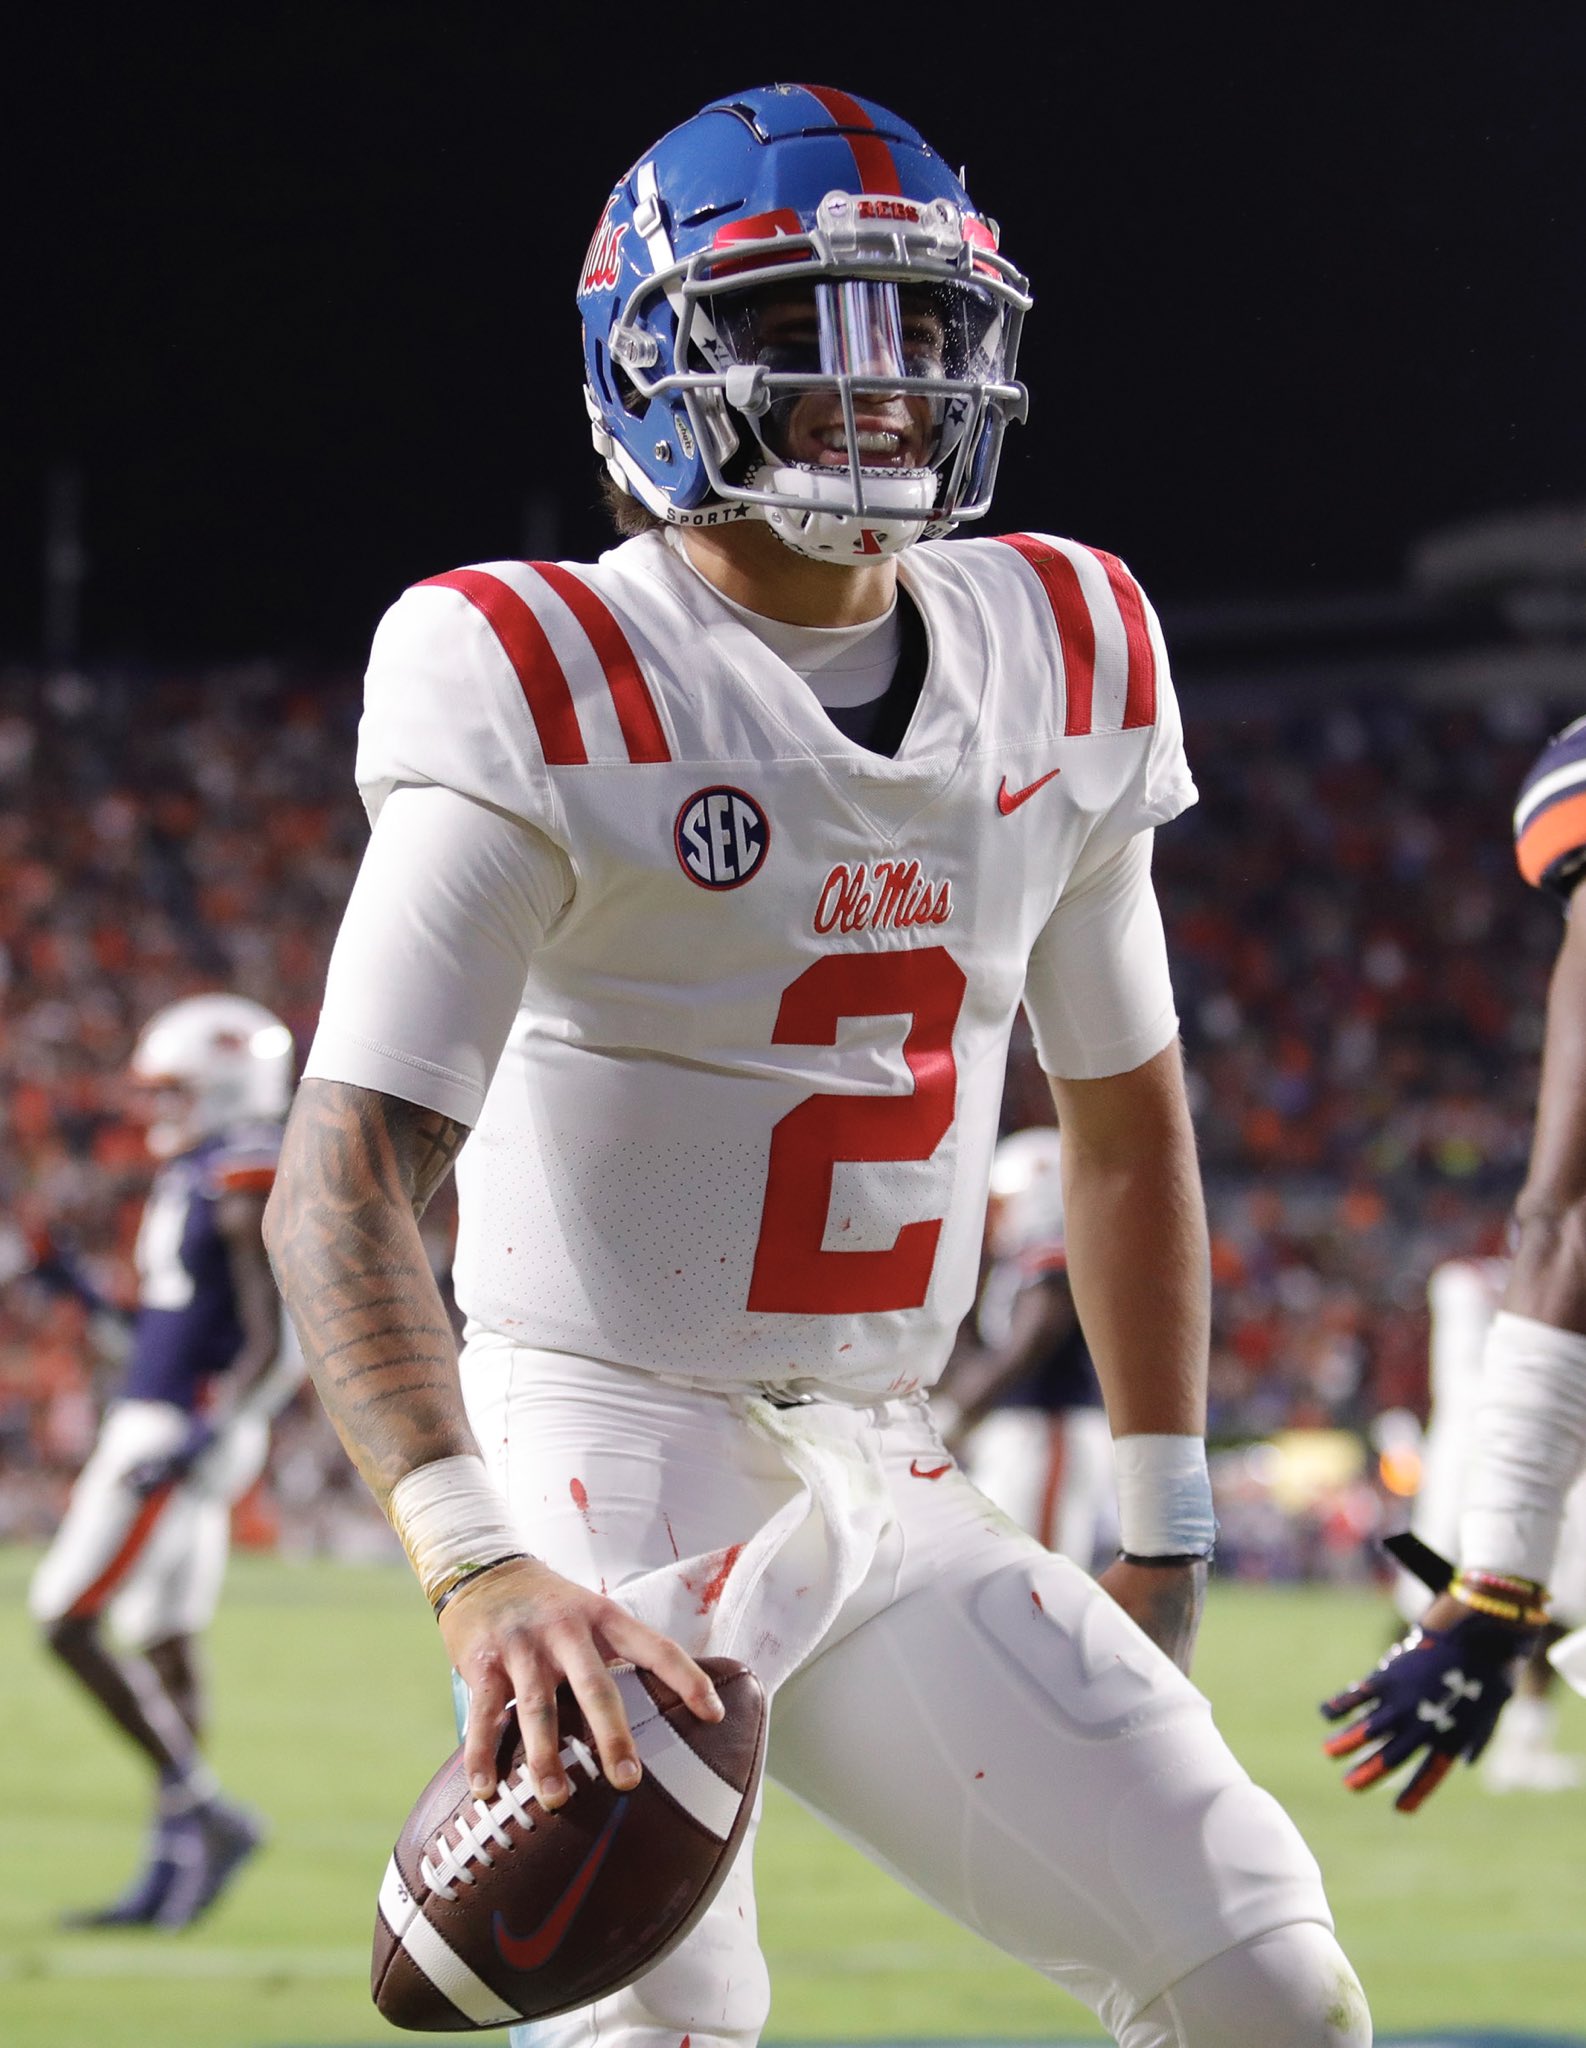 PFF College on X: 'The Carolina Panthers pick Ole Miss QB Matt Corral at  No. 94 overall. FORTY-NINE touchdowns (most among SEC QBs) 